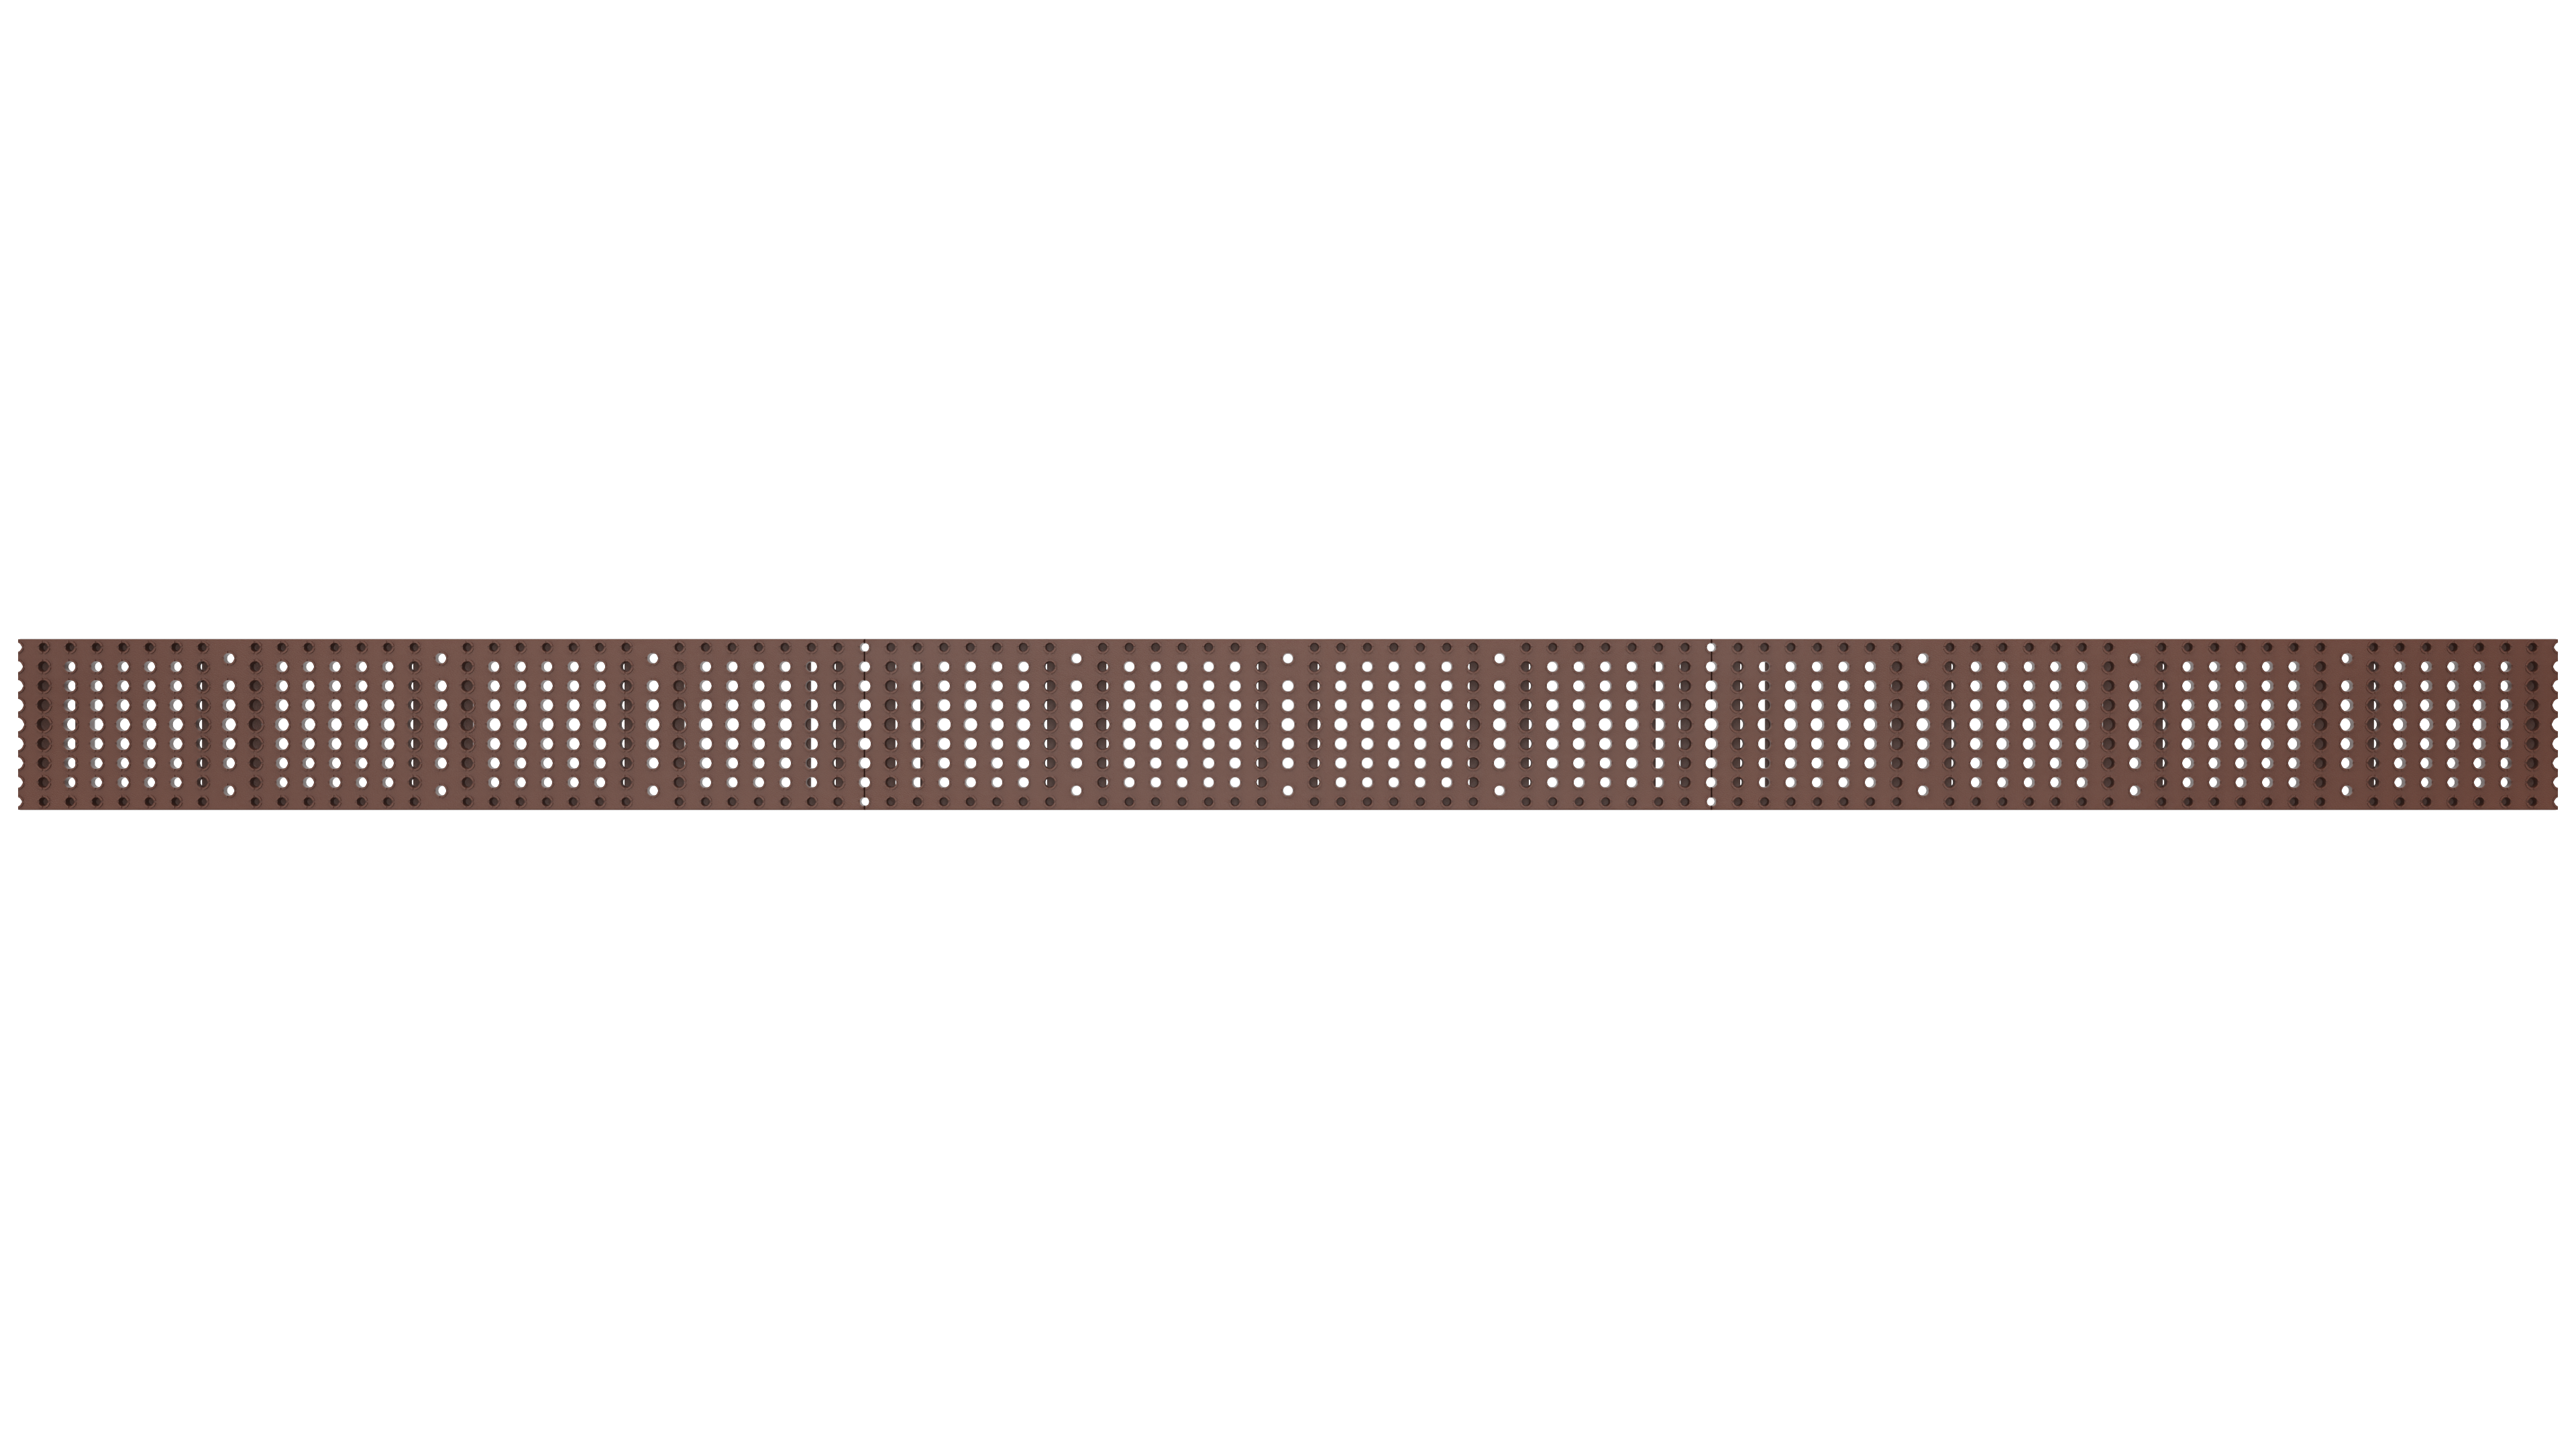 Top view of 5x24 rendered grate